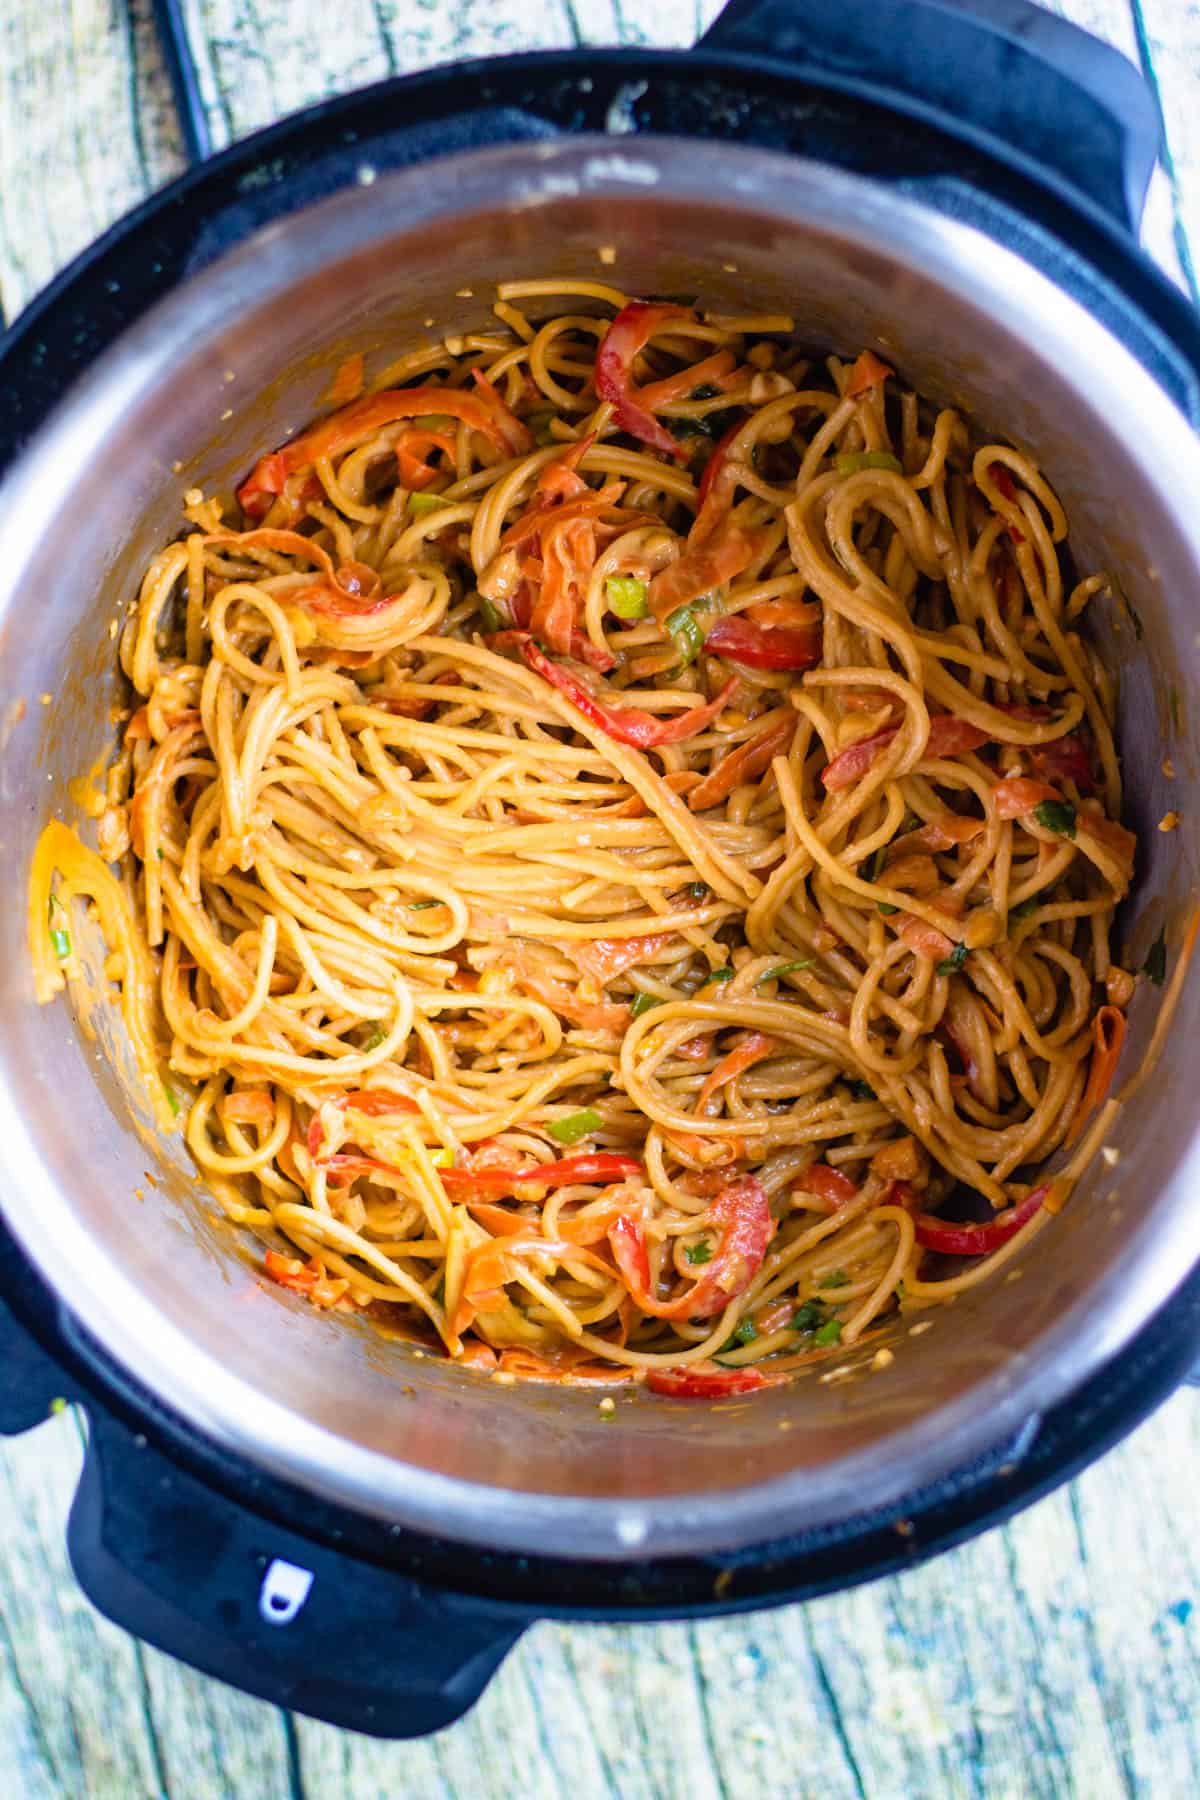 Top view inside Instant Pot with cooked spaghetti noodles and sauteed vegetables added back into the mixture. 